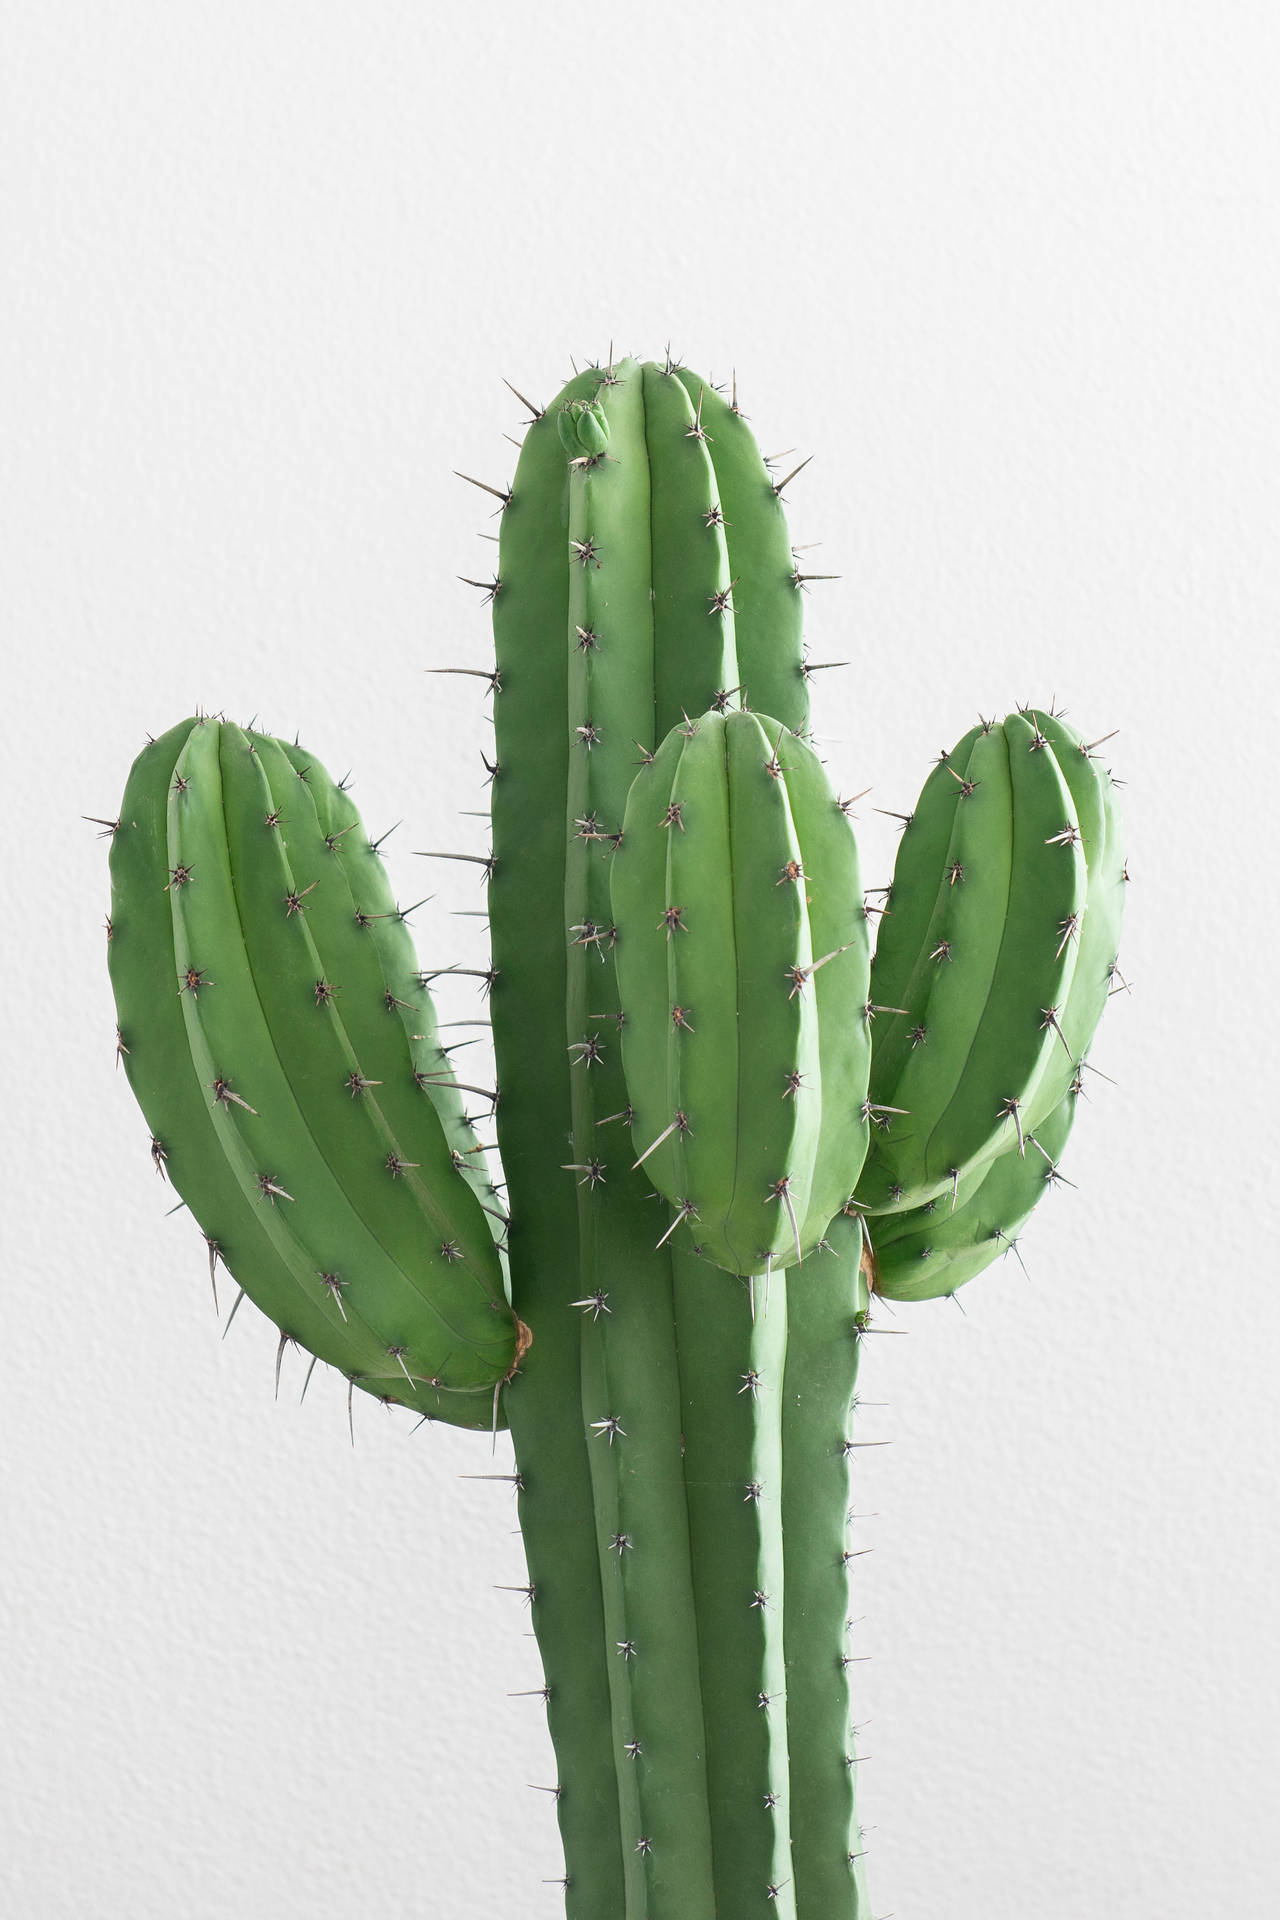 2317X3475 Cactus Wallpaper and Background